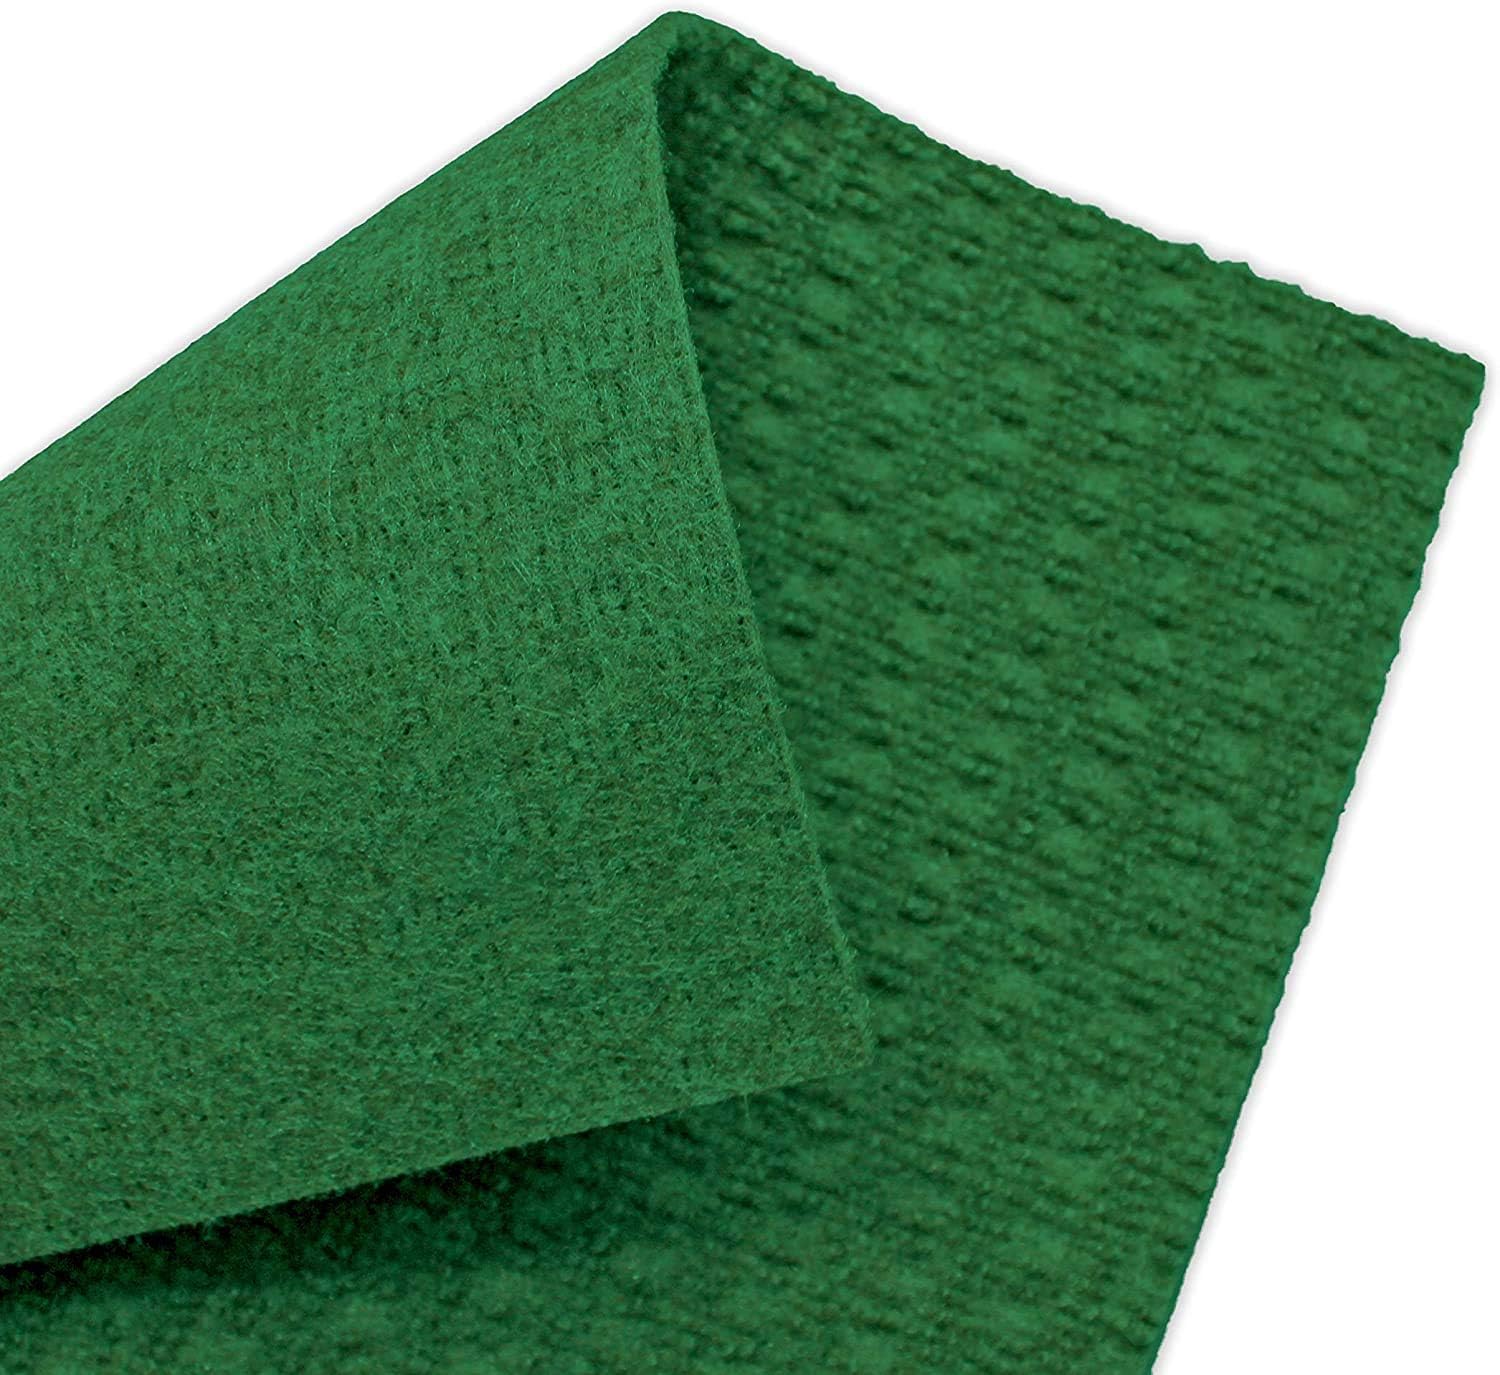 Koeckritz Rugs Soft and Durable Interlace Indoor - Outdoor Area Rugs Lightweight and Flexible (Color: Heather Green)